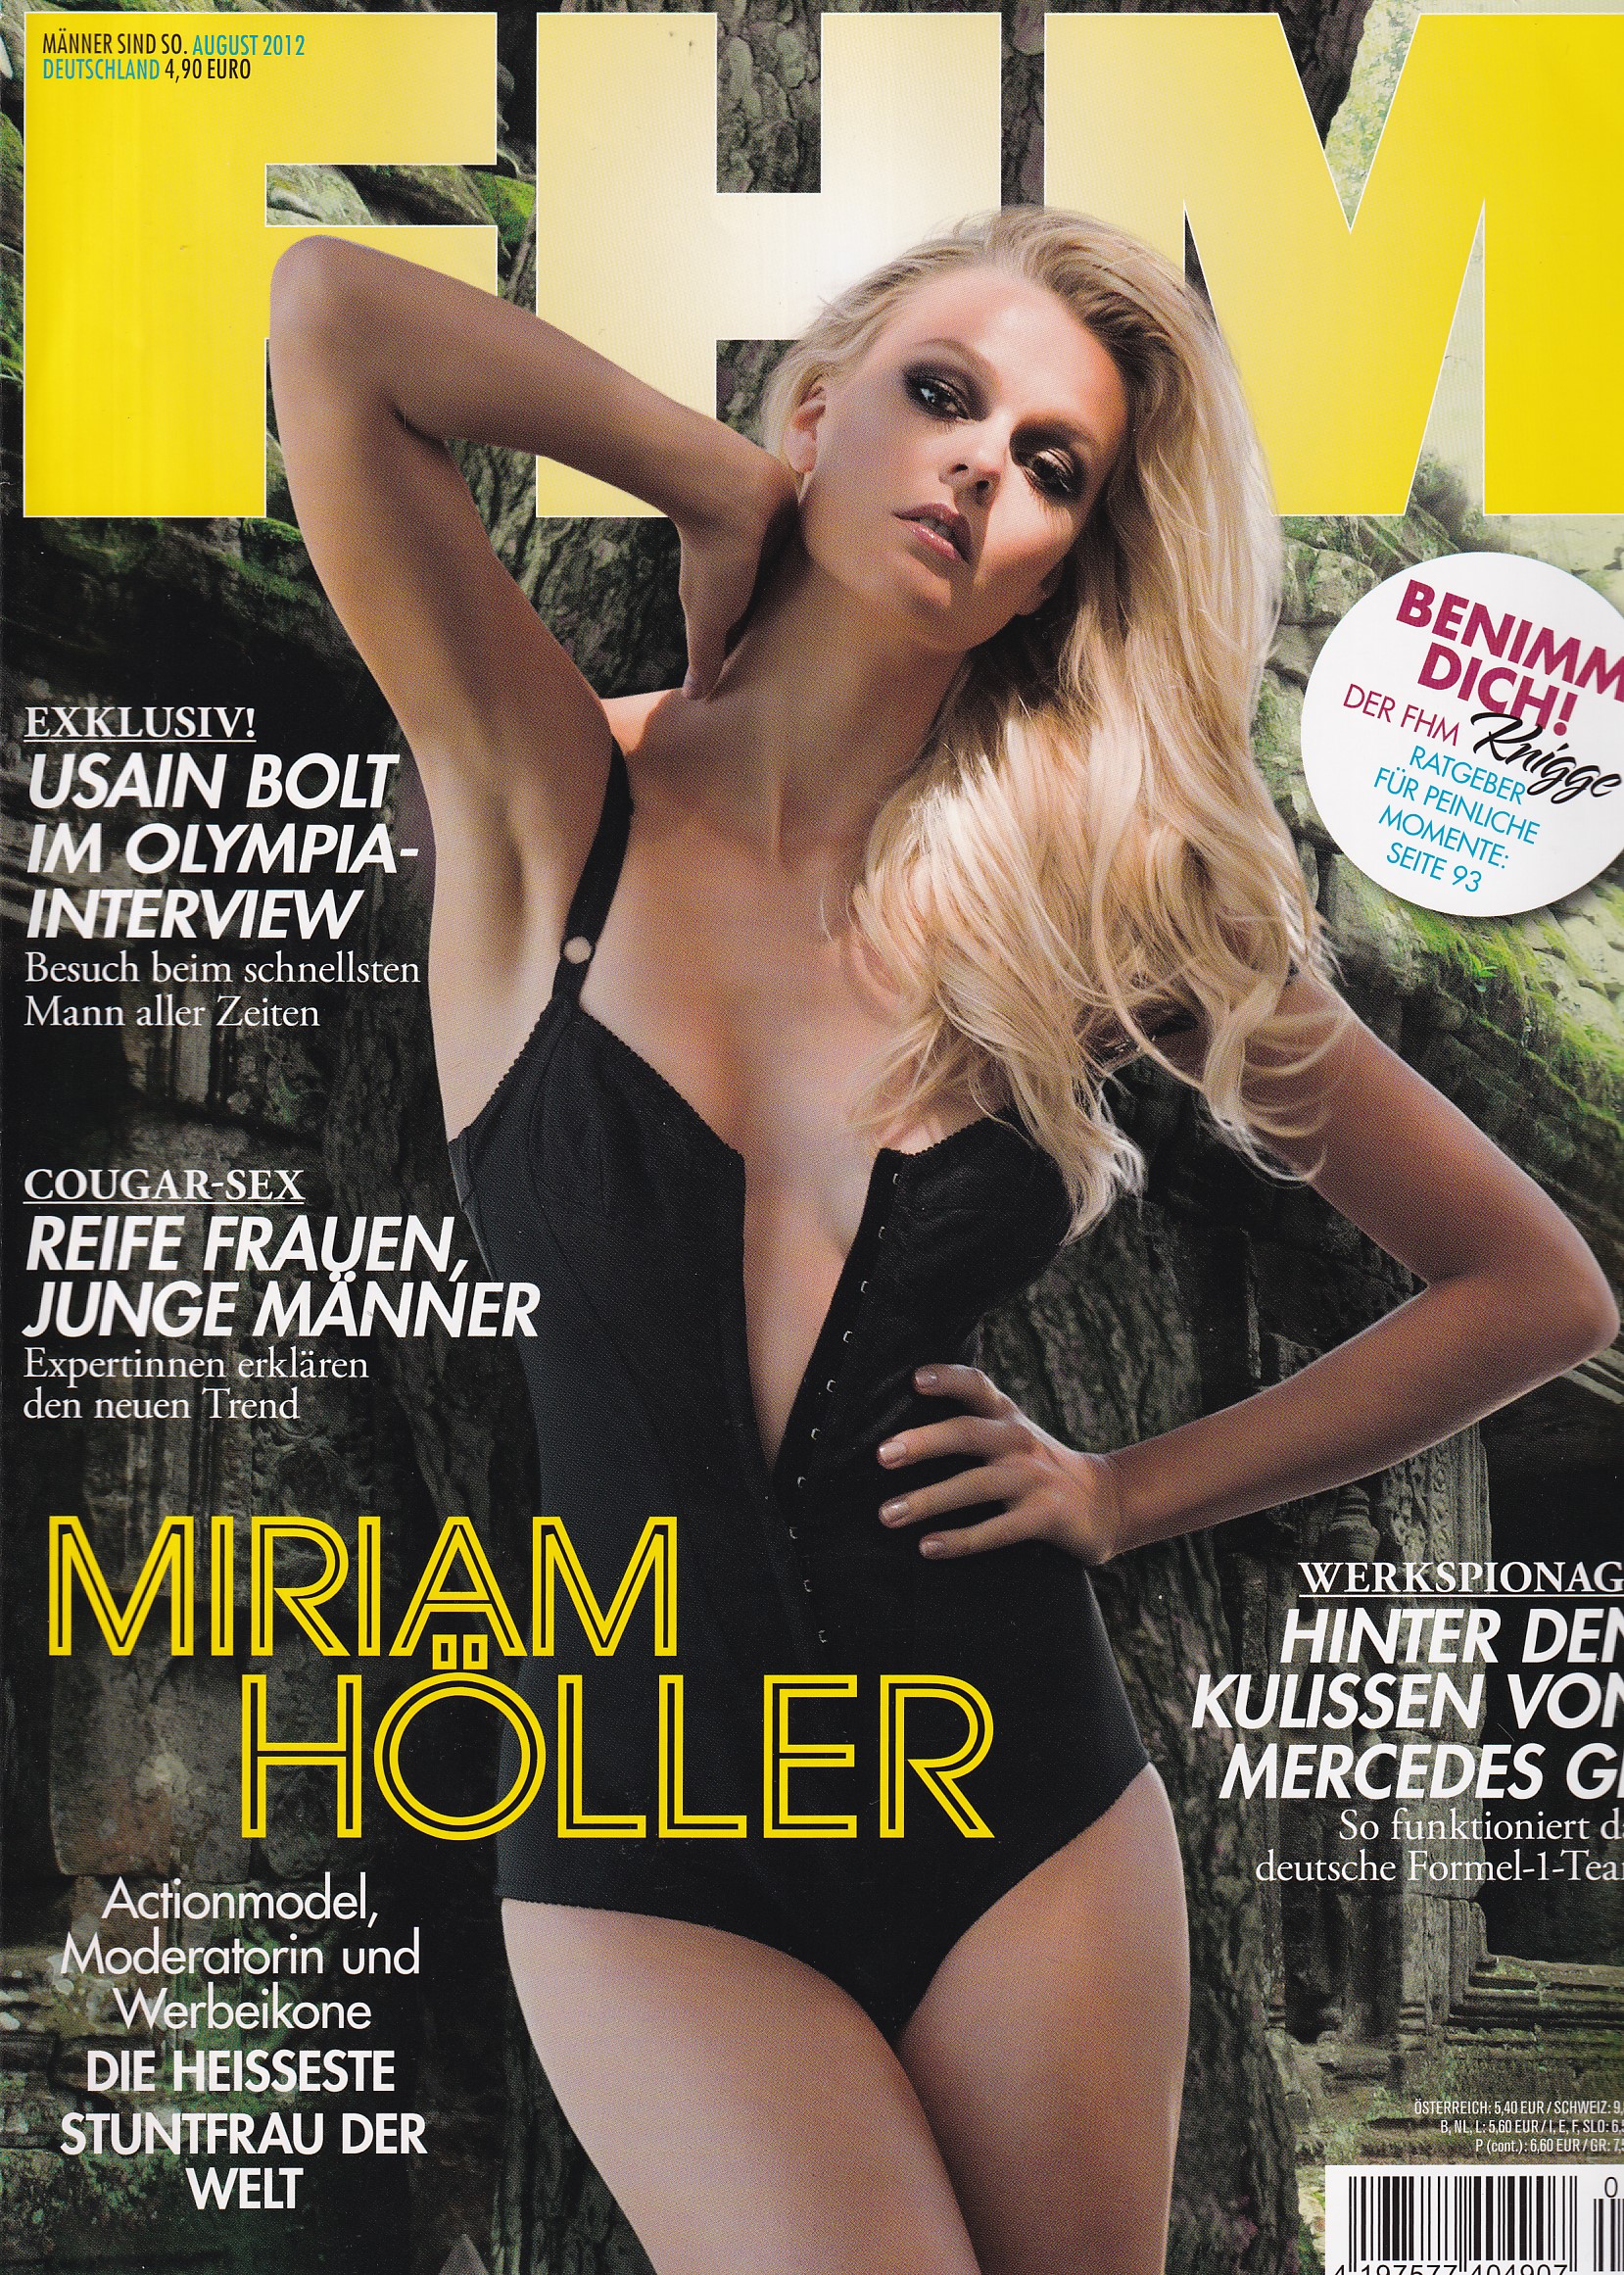 FHM - FOR HIM MAGAZINE - 2012-08 August